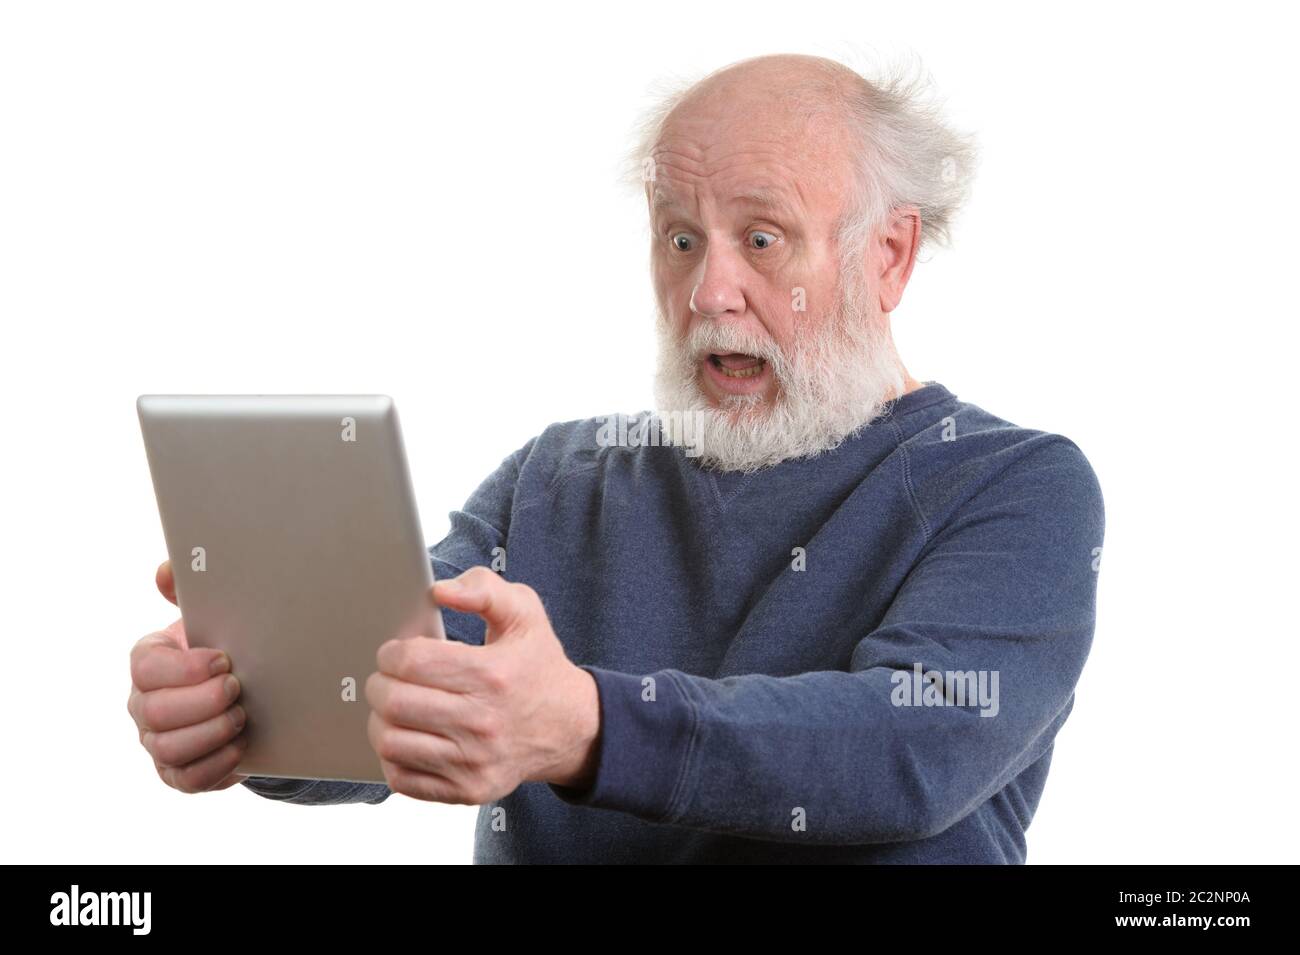 Funny choqué old man using tablet computer isolated on white Banque D'Images